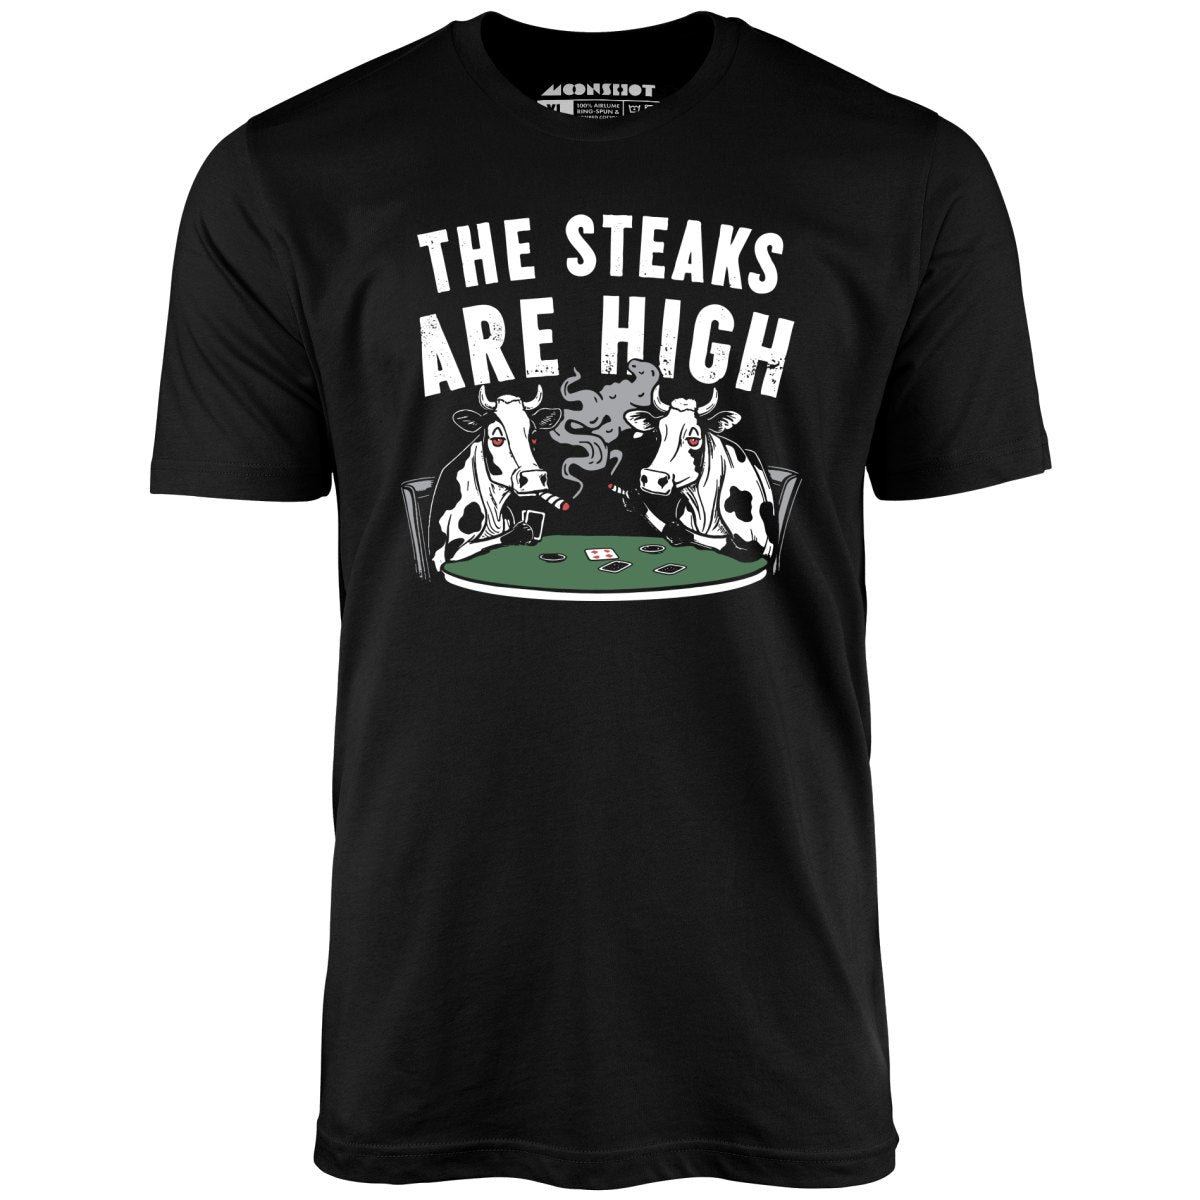 The Steaks Are High - Unisex T-Shirt